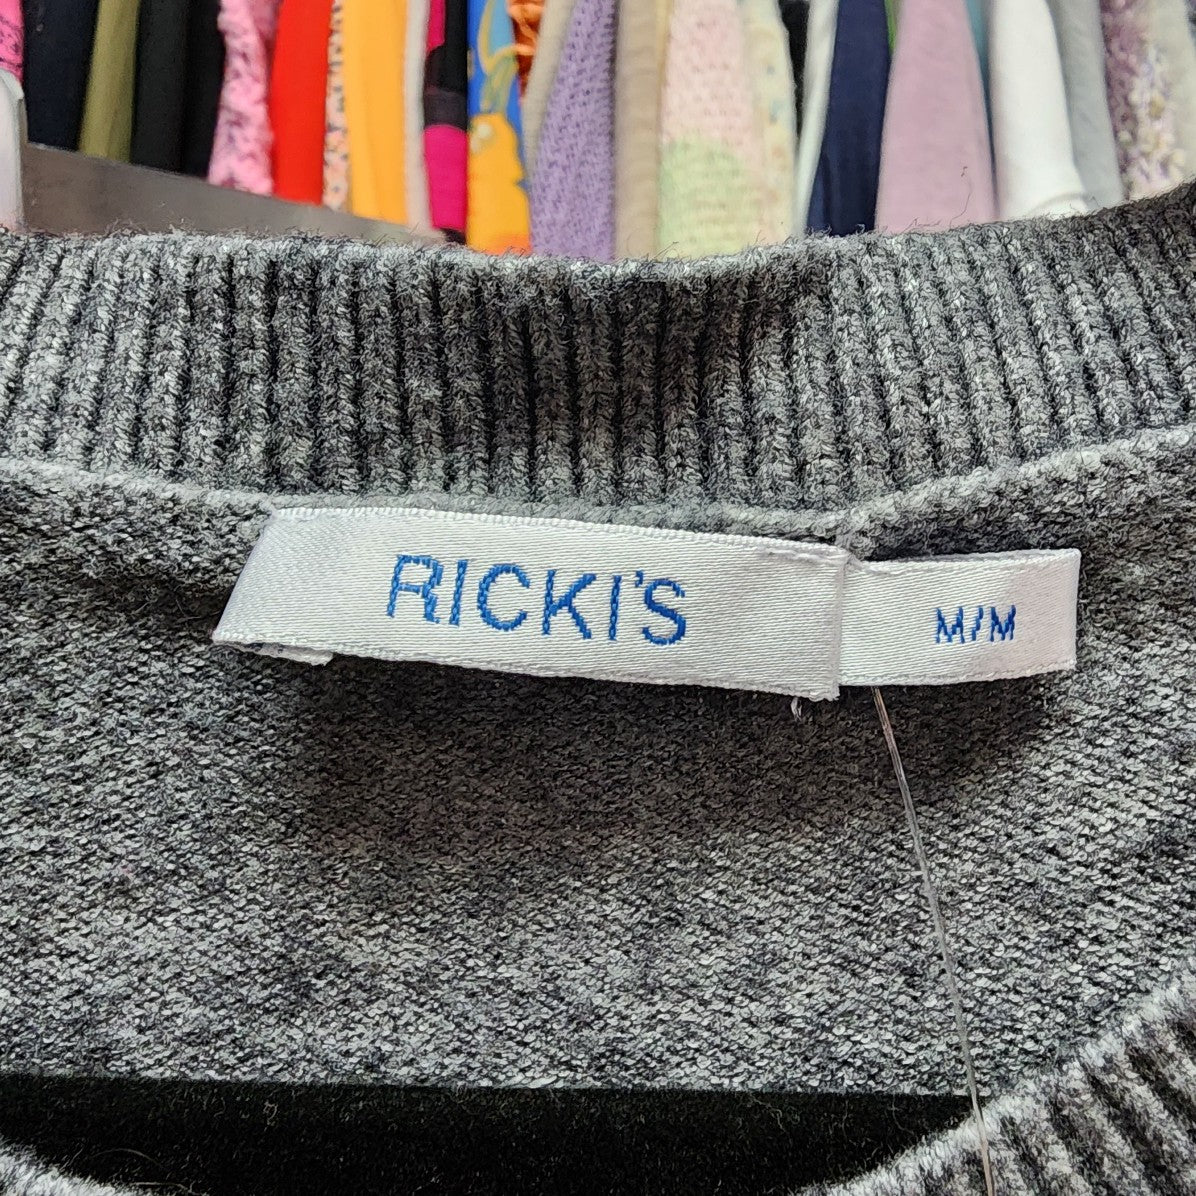 Ricki's Grey Knit Graphic Embroidered Love Sweater Size M